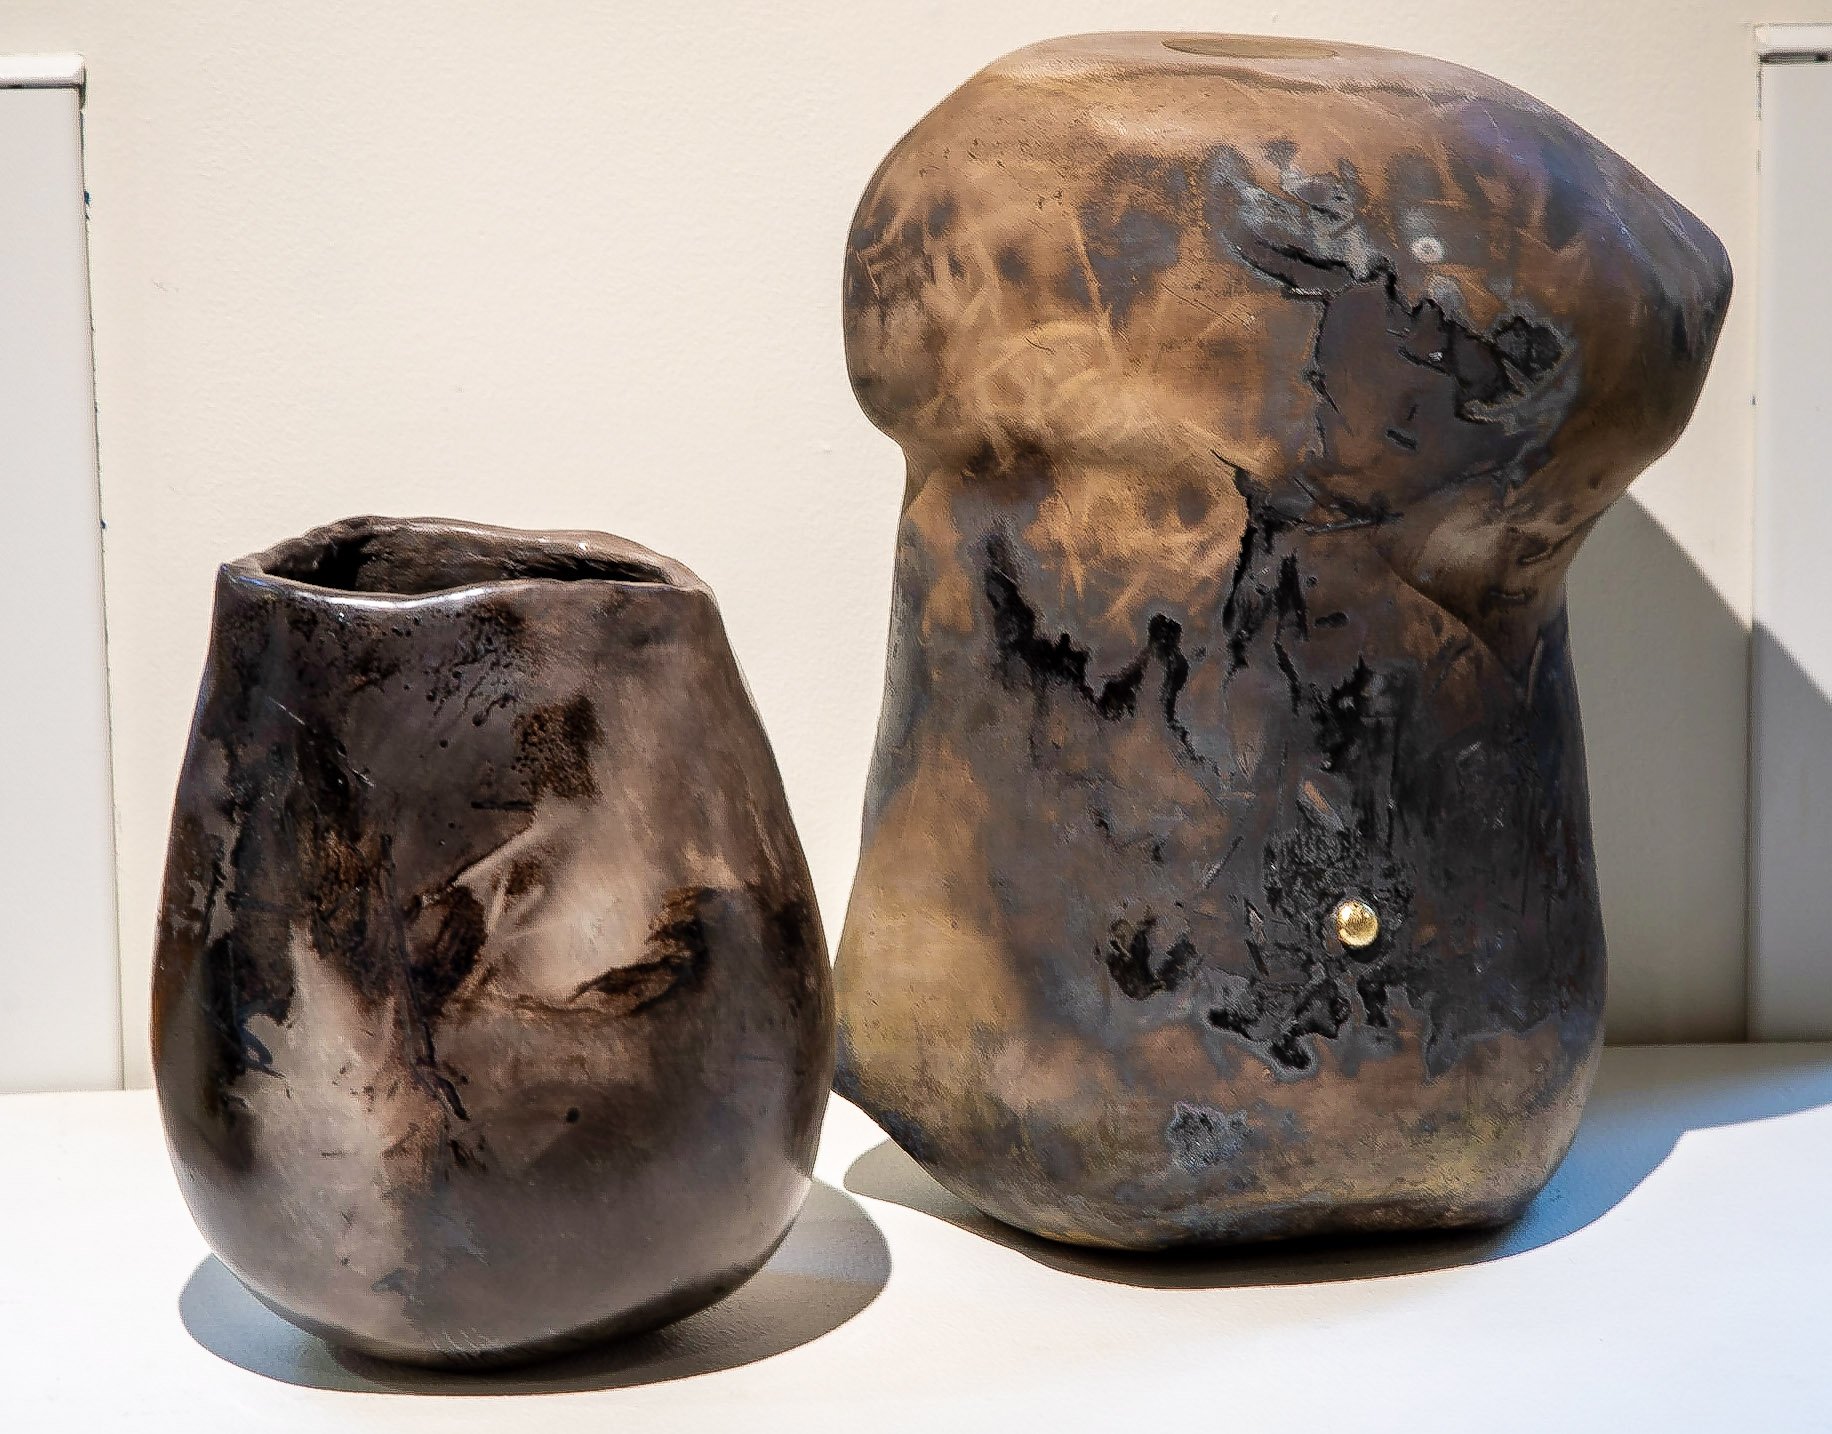 Linda Workman-Morelli, "Burnished Vessel" and "Some Seeds Fell on Fertile Ground"